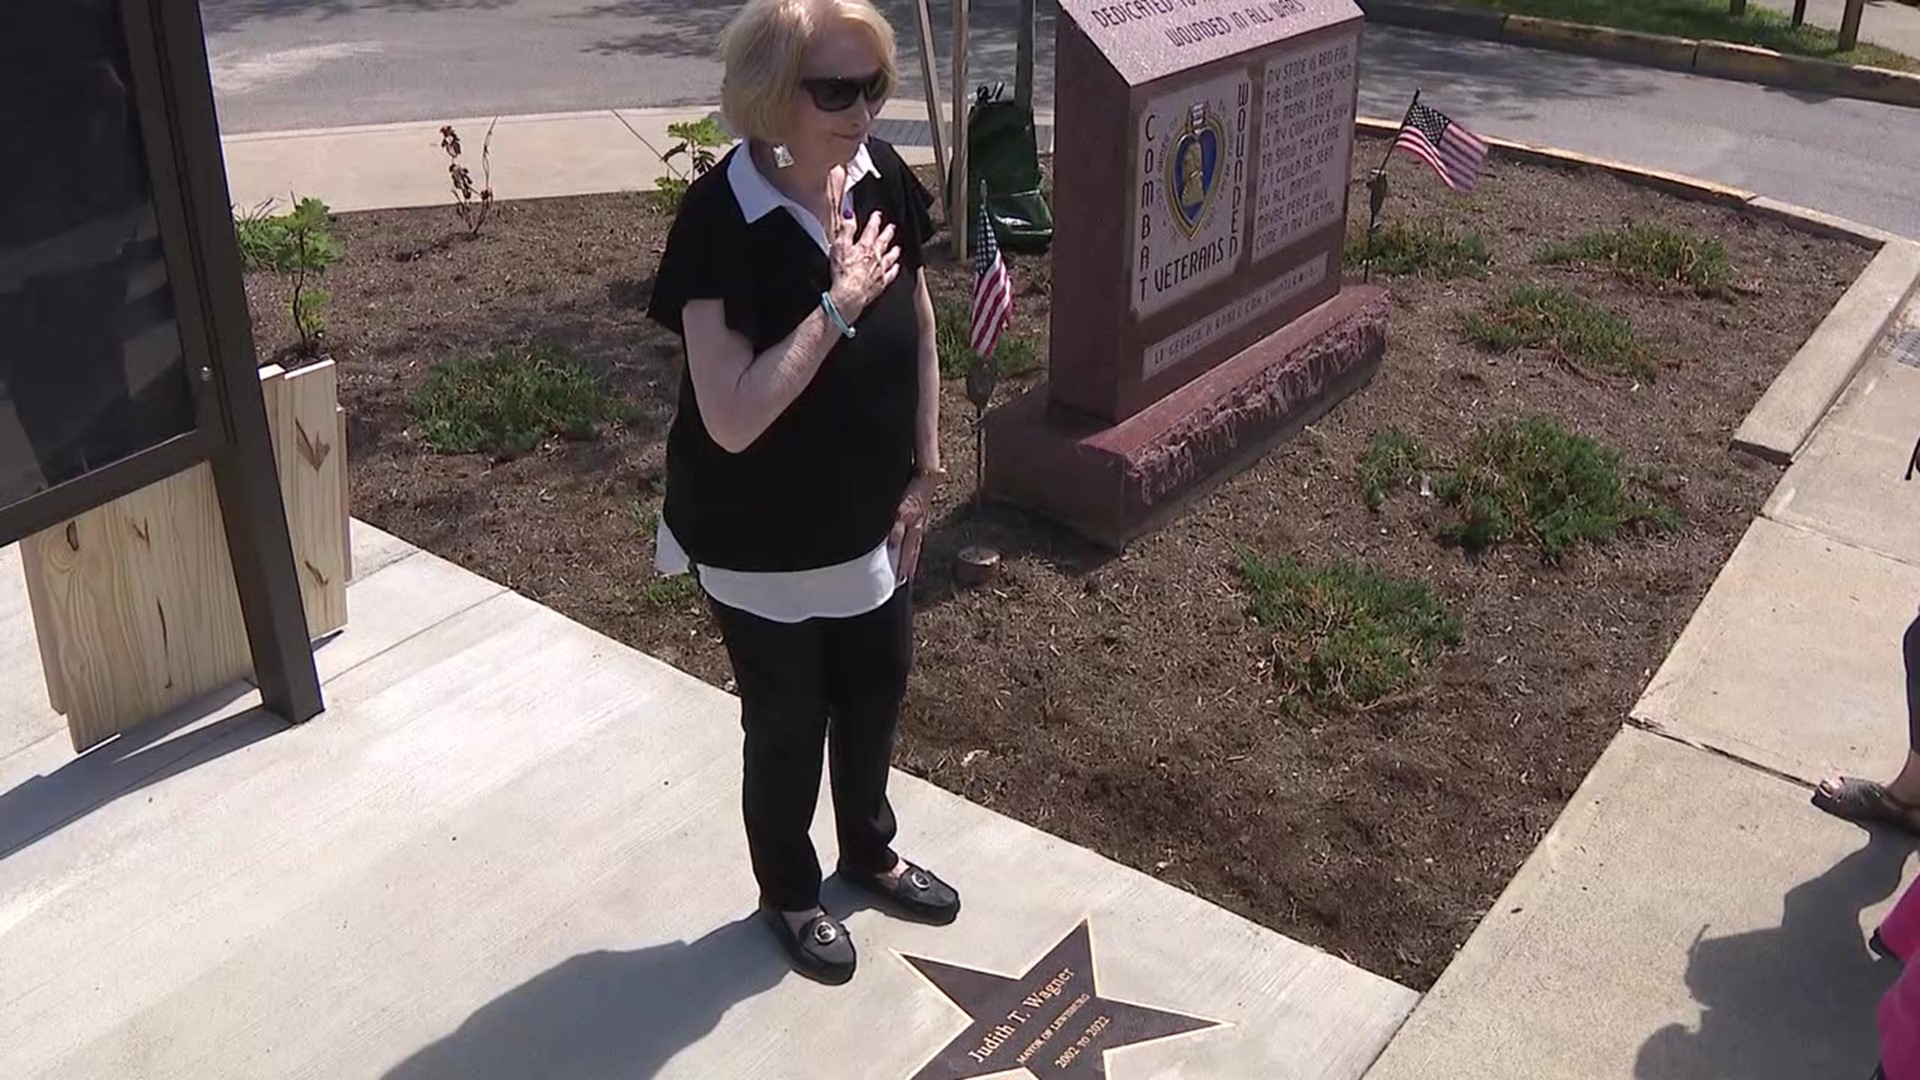 Just like Hollywood's Walk of Fame, former Lewisburg Mayor Judy Wagner was given a star in the community she led for 20 years.